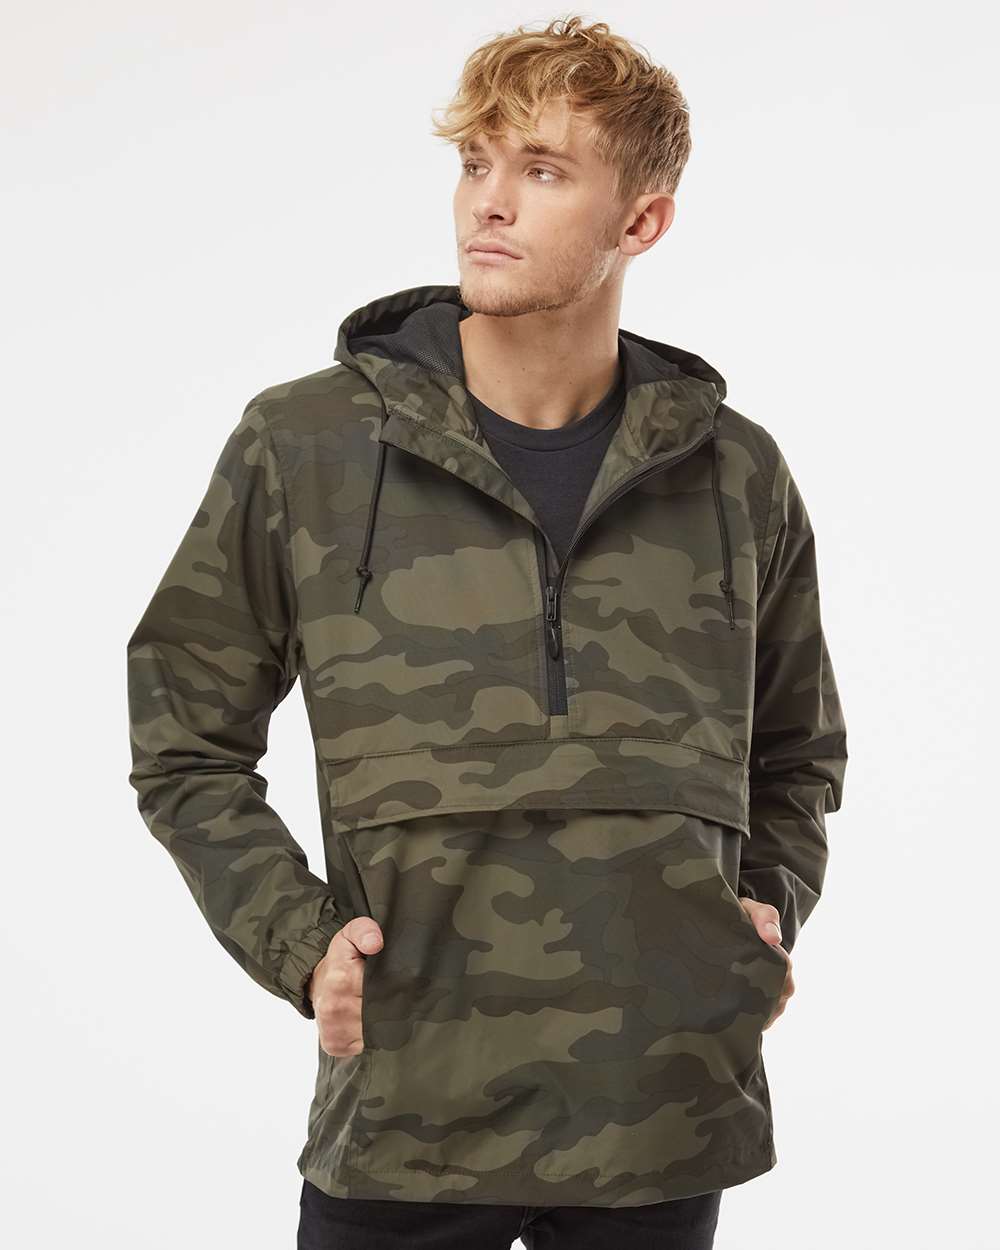 Independent Trading Co. Nylon Anorak EXP94NAW #colormdl_Forest Camo